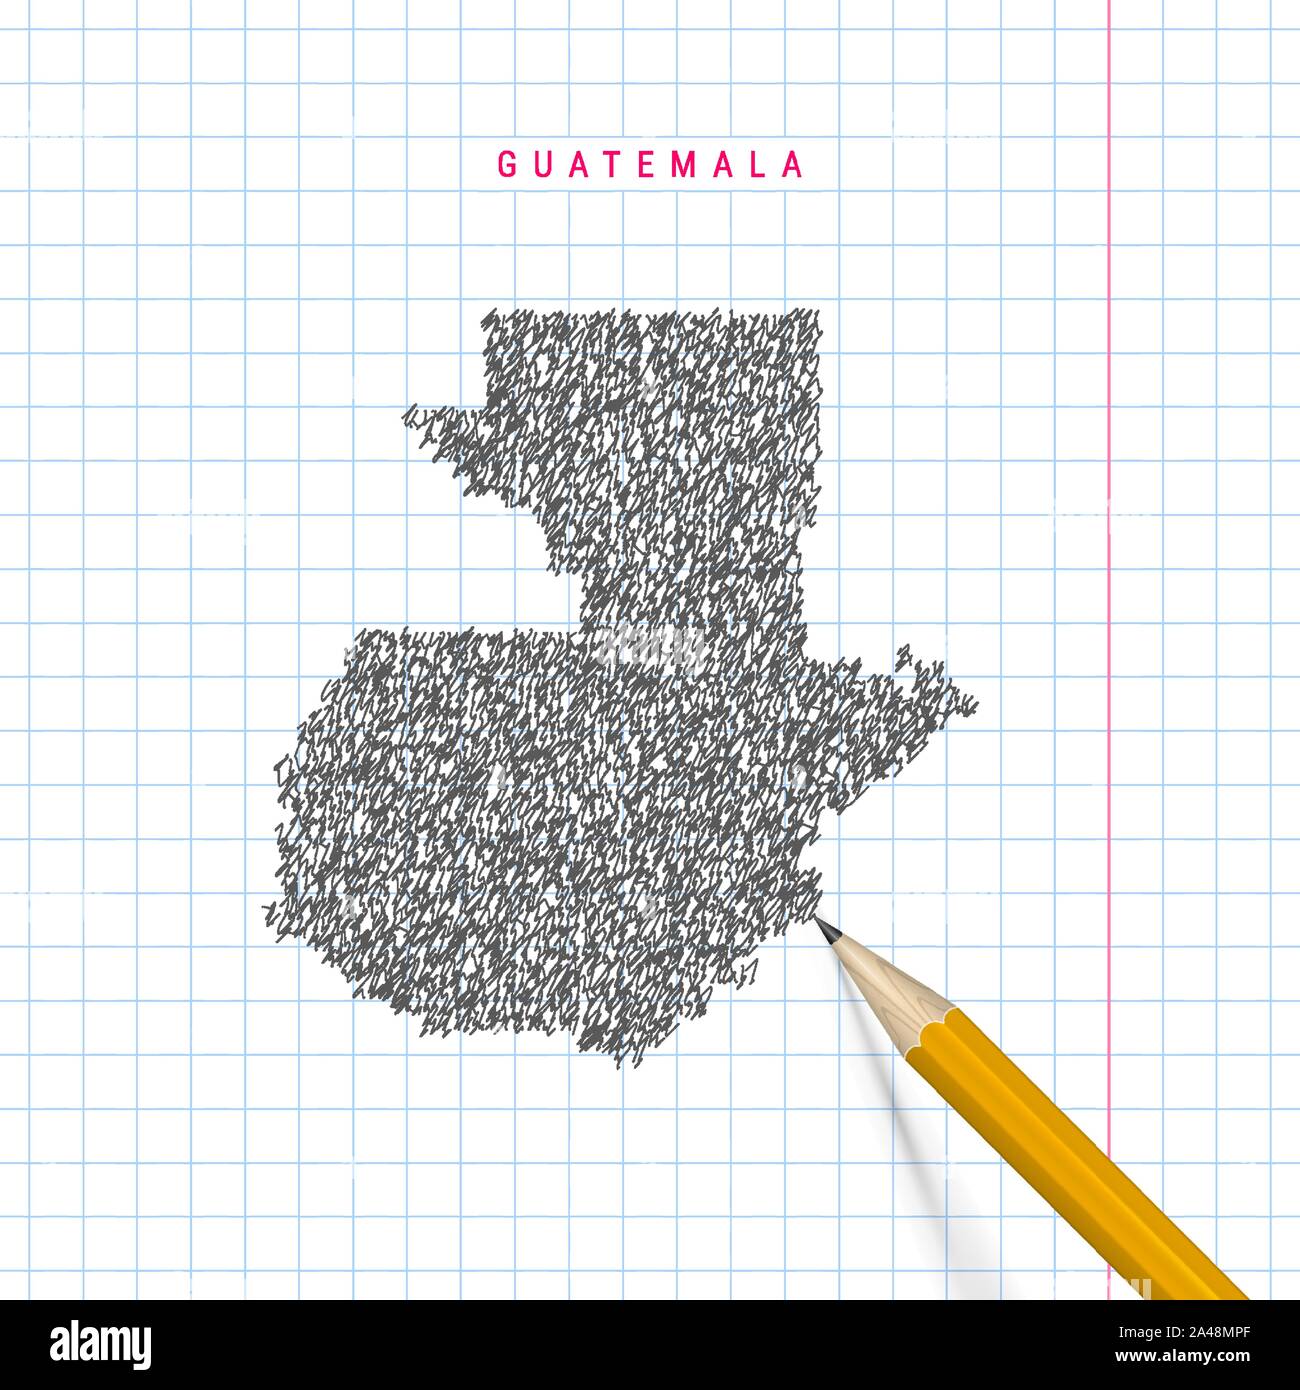 Guatemala Sketch Scribble Map Drawn On Checkered School Notebook Paper Background Hand Drawn 6203